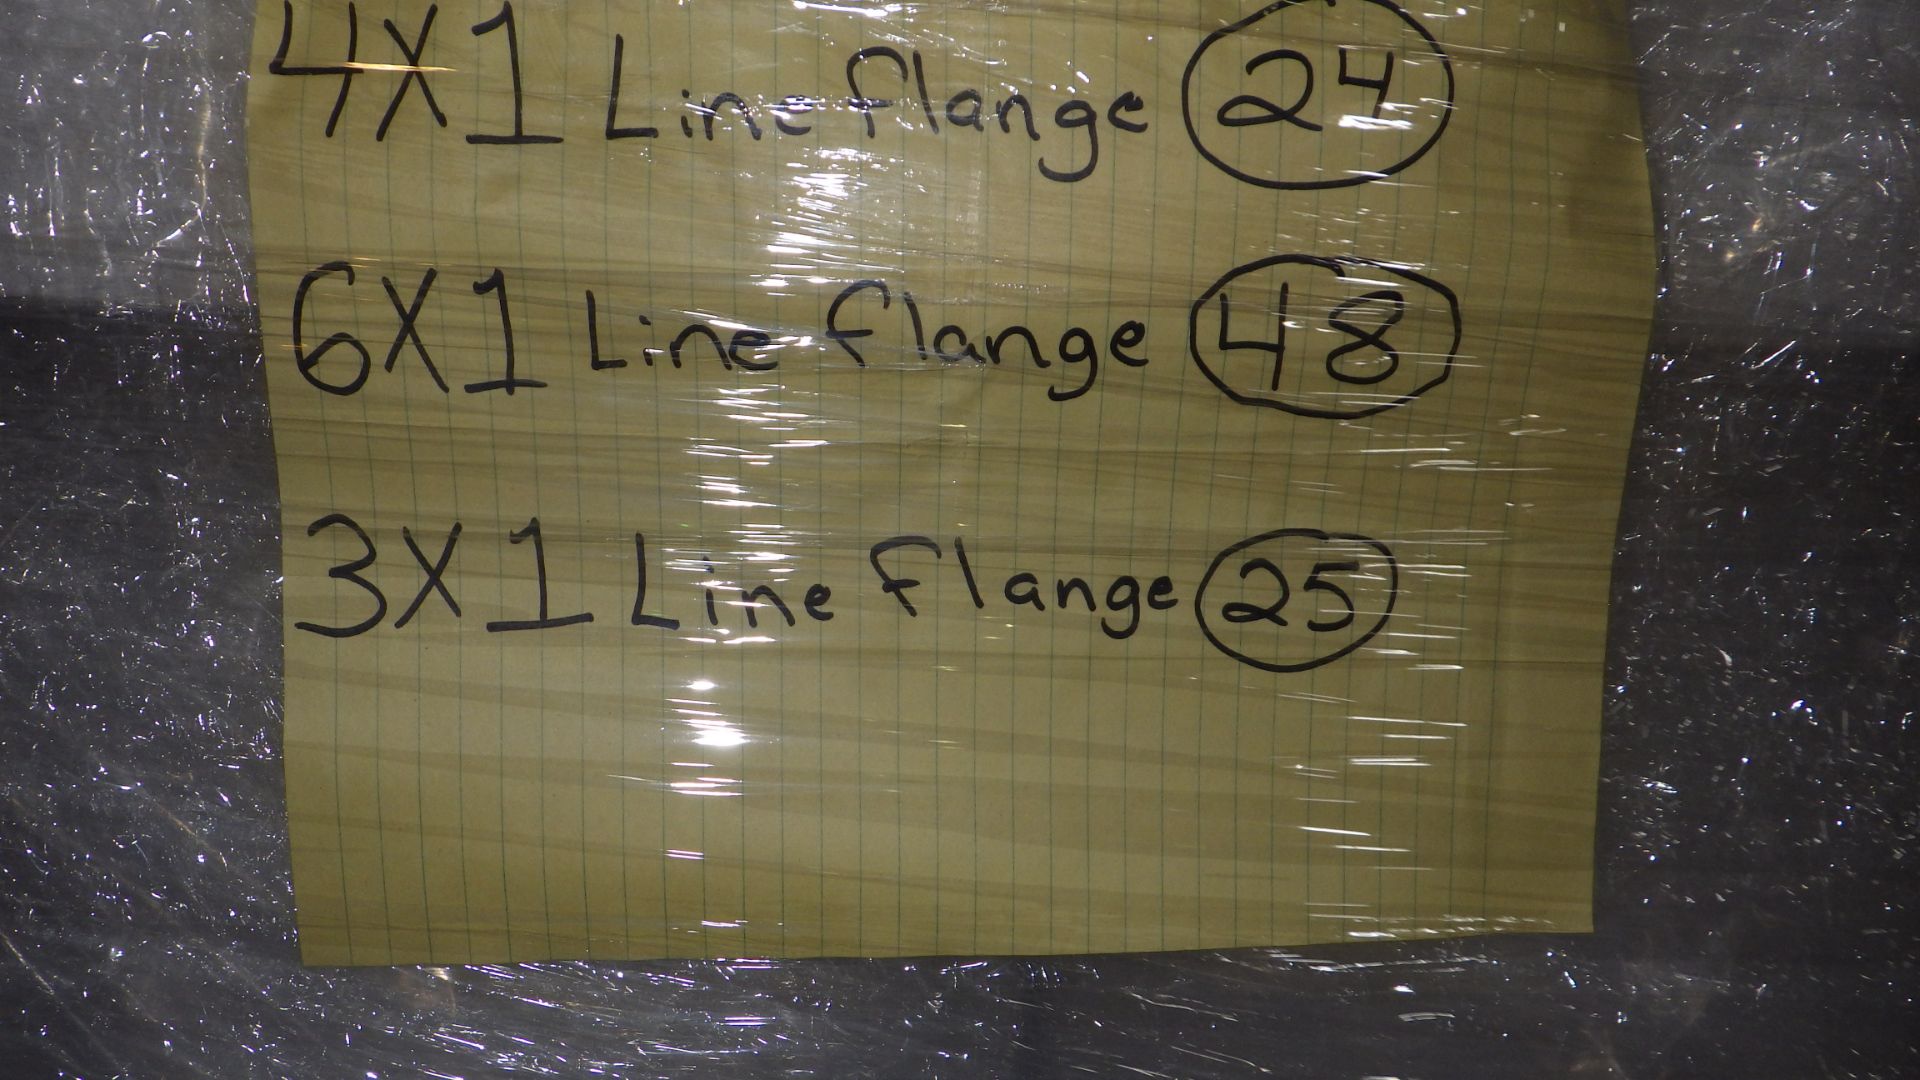 4, 6, AND 3 X1 LINE FLANGE PIPE INSULATION 98 PCS - Image 2 of 3